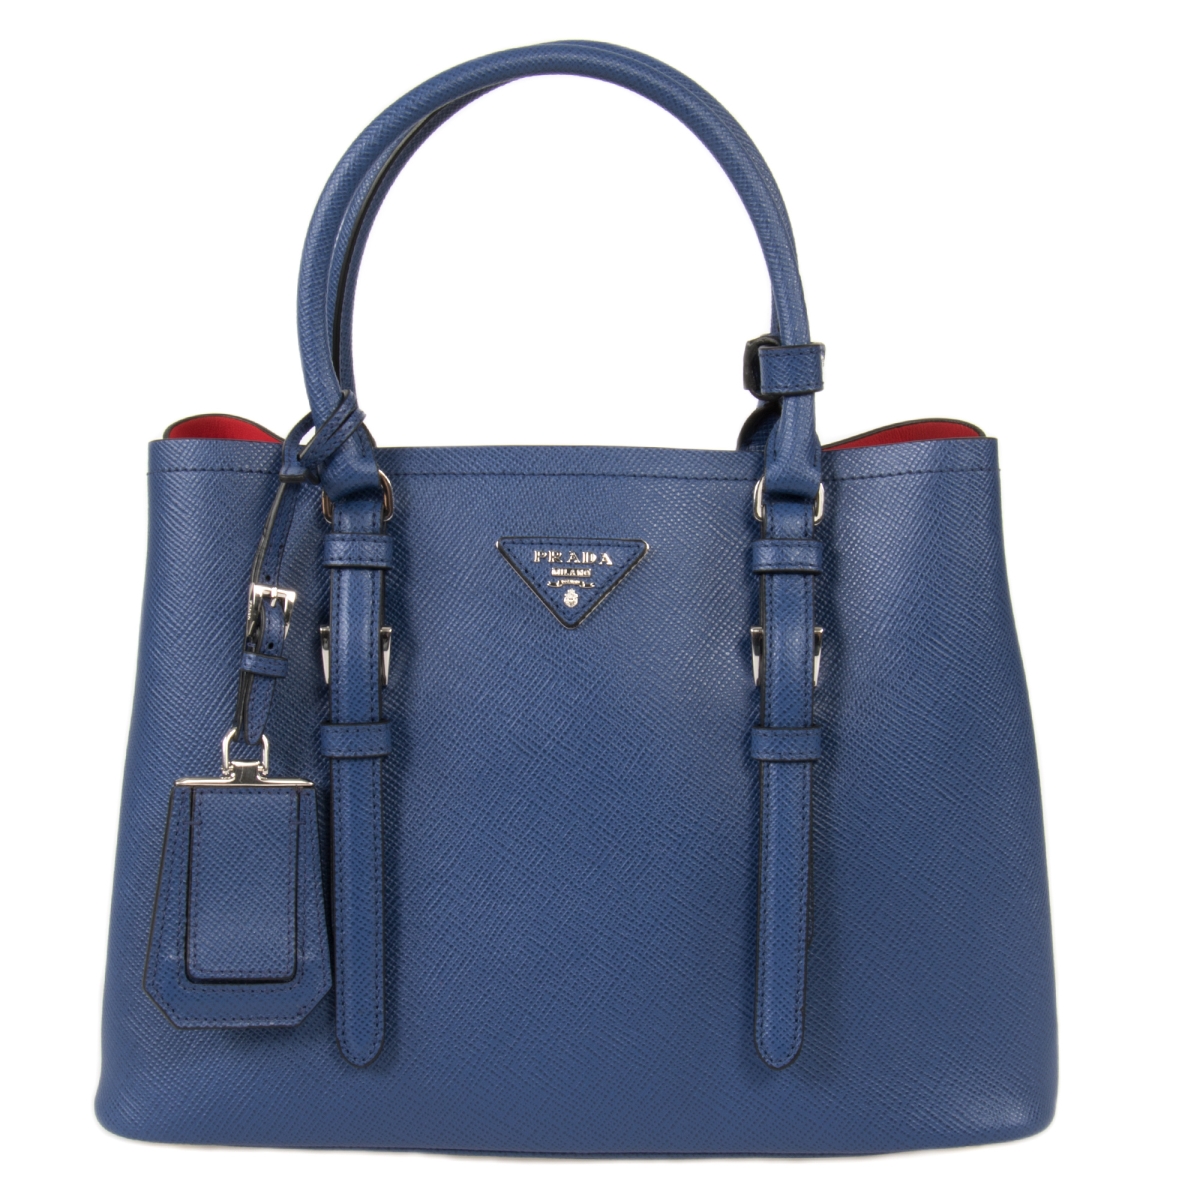 Prd-hbag-1bg883-f0021-c Small Double Tote Leather Bag, Inchiostro & Ink Blue